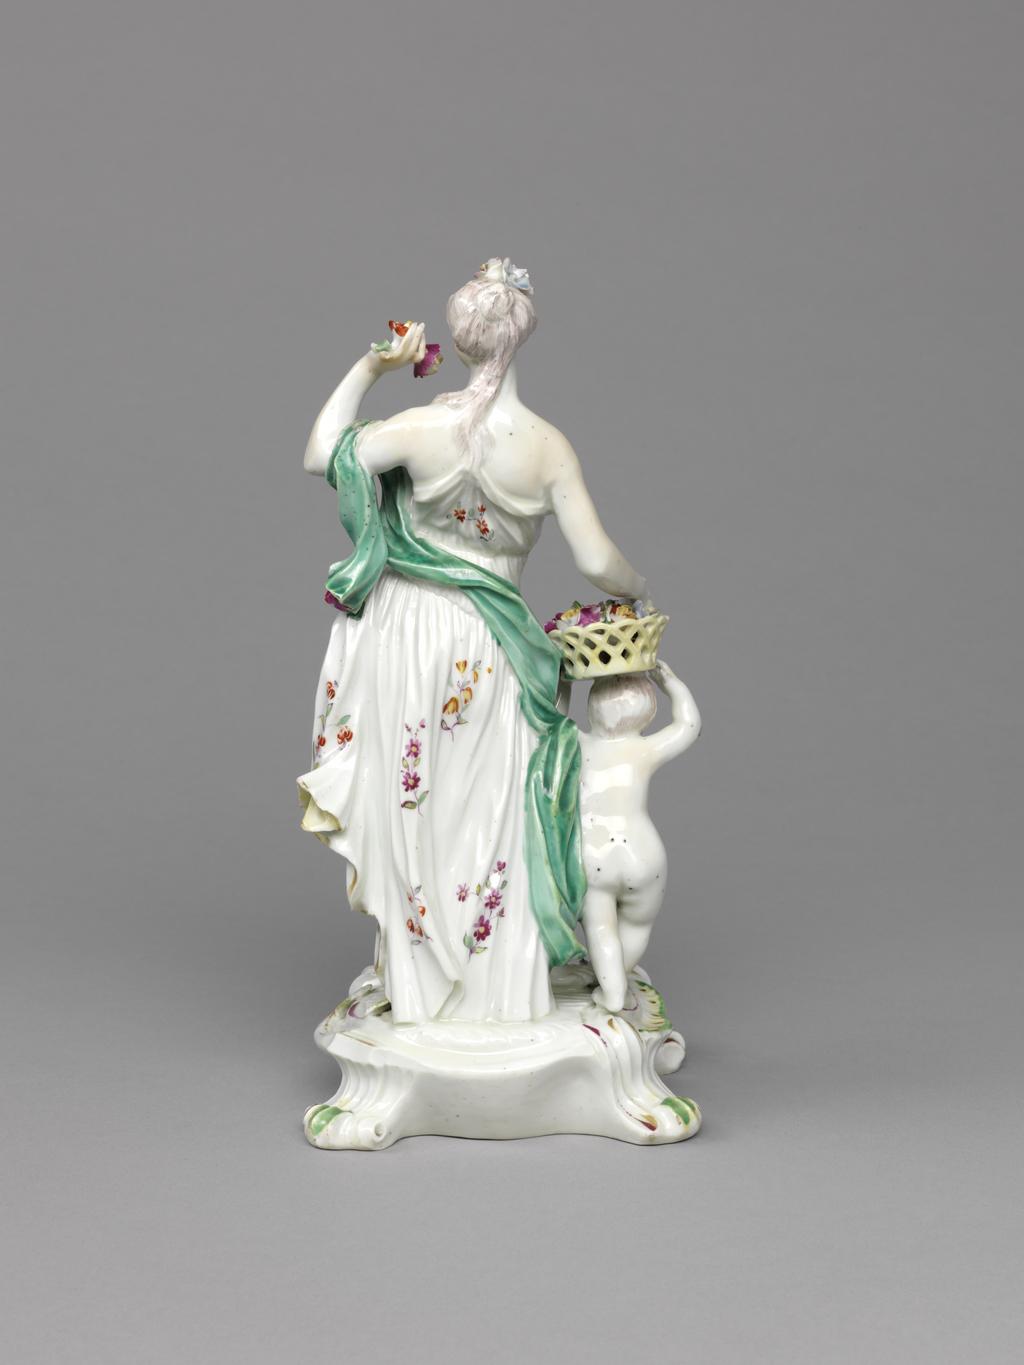 An image of Figure group. Spring (from a set of the Seasons). Derby Porcelain Factory, England. Eberlein, Johann Friedrich, modeller, after (German, 1696-1749). The circular base has four scroll feet. The edges are decorated with two rocaille 'frills' and a scroll, and the top is strewn with applied flowers. Spring stands on her left leg with her right leg relaxed behind her, leaning back slightly, and looking to her left . She holds up two flowers in her left hand, and has her right over an openwork basket filled with multi-coloured flowers which is held up by a nude infant standing beside her. She has long brown hair partly in a chignon and partly hanging down her back, and decorated at the front with three flowers. Her arms and breasts are bare, and below them she wears a white tunic with a floral pattern, a yellow lining, and gold edges, which is help up by a gold strap over her left shoulder. A turquoise-green scarf is draped over her left upper arm, across her back and round her right side.The child has brown hair and eyes, and a red lips. The edge of the base is picked out in green, yellow, dark pink and gold, and the flowers are variously dark pink, red and yellow, and blue and yellow. Soft-paste porcelain, slip-cast, with applied details, lead-glazed, and painted in a little pale blue, turquoise-green, green, yellow, flesh, dark pink, red, brown, and grey enamels, and lightly gilt. The glaze has many black speckles. The unglazed underside has a large circular ventilation hole, and four patchmarks. Height, whole, 23.5 cm, width, whole, 11.2 cm, circa 1765 -1770. Rococo. Production Note: The figure was based on a model which belonged to a set of Seasons modelled by J.F. Eberlein (1696-1749).